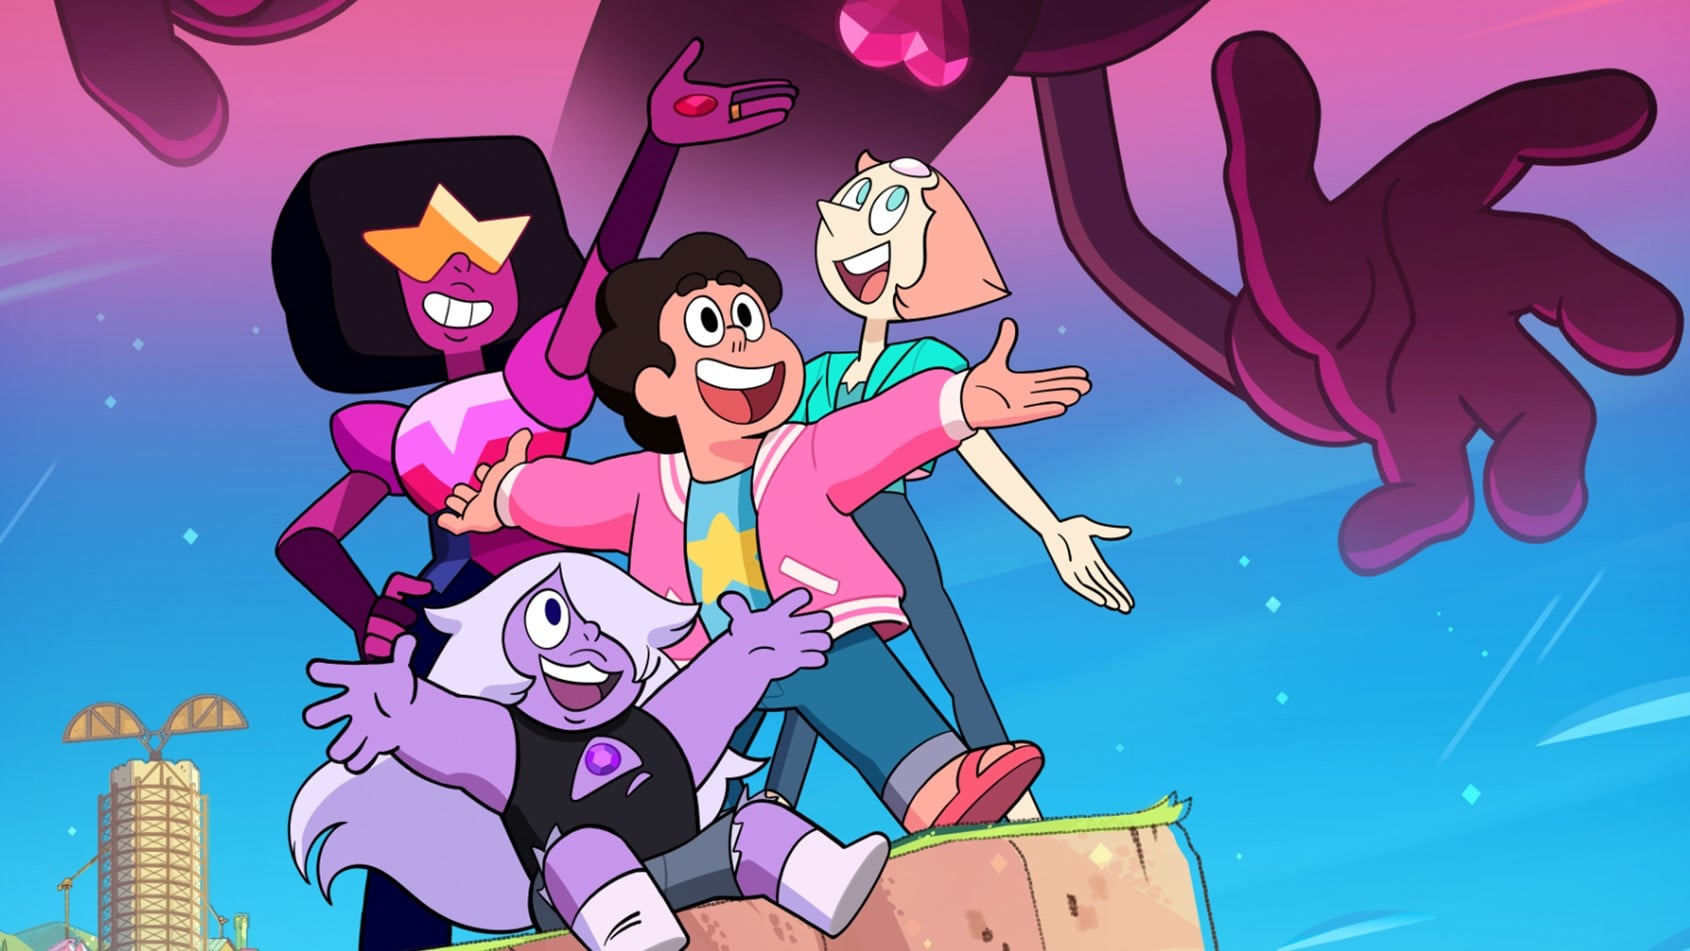 Steven Universe: The Movie' Poster Reveals A New Menace To Beach City.